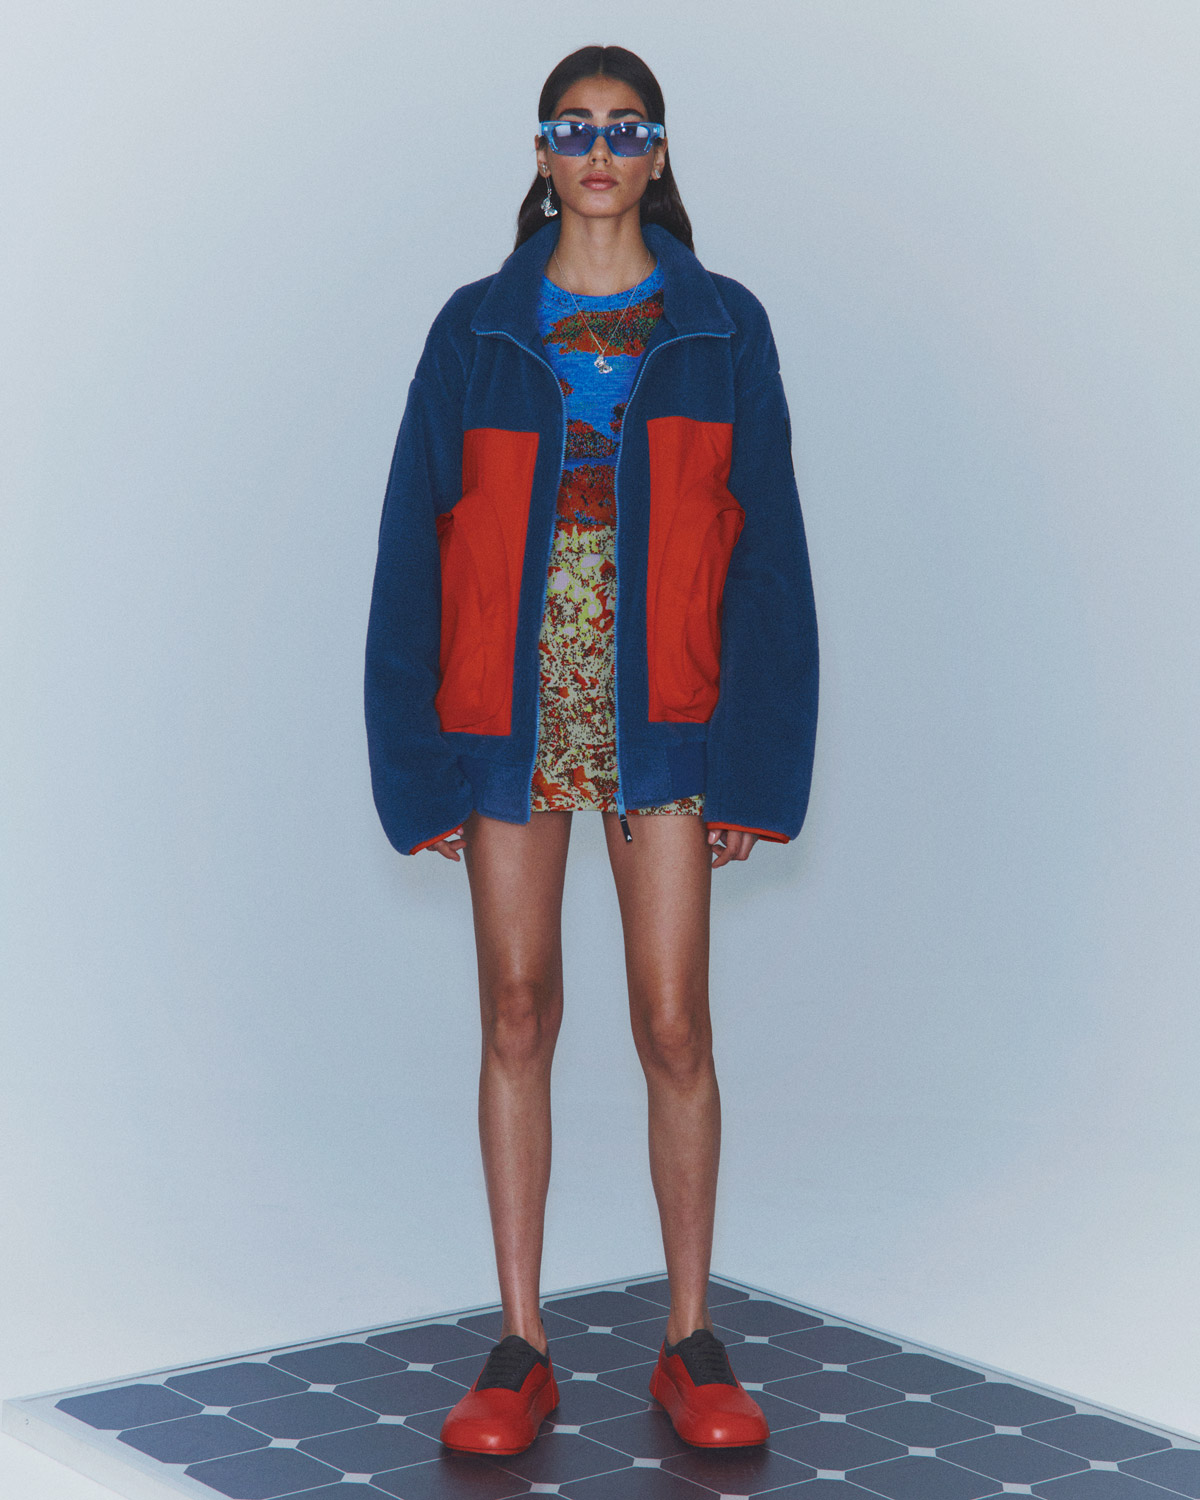 Look 58 from AMBUSH's Spring/Summer 2022 collection.